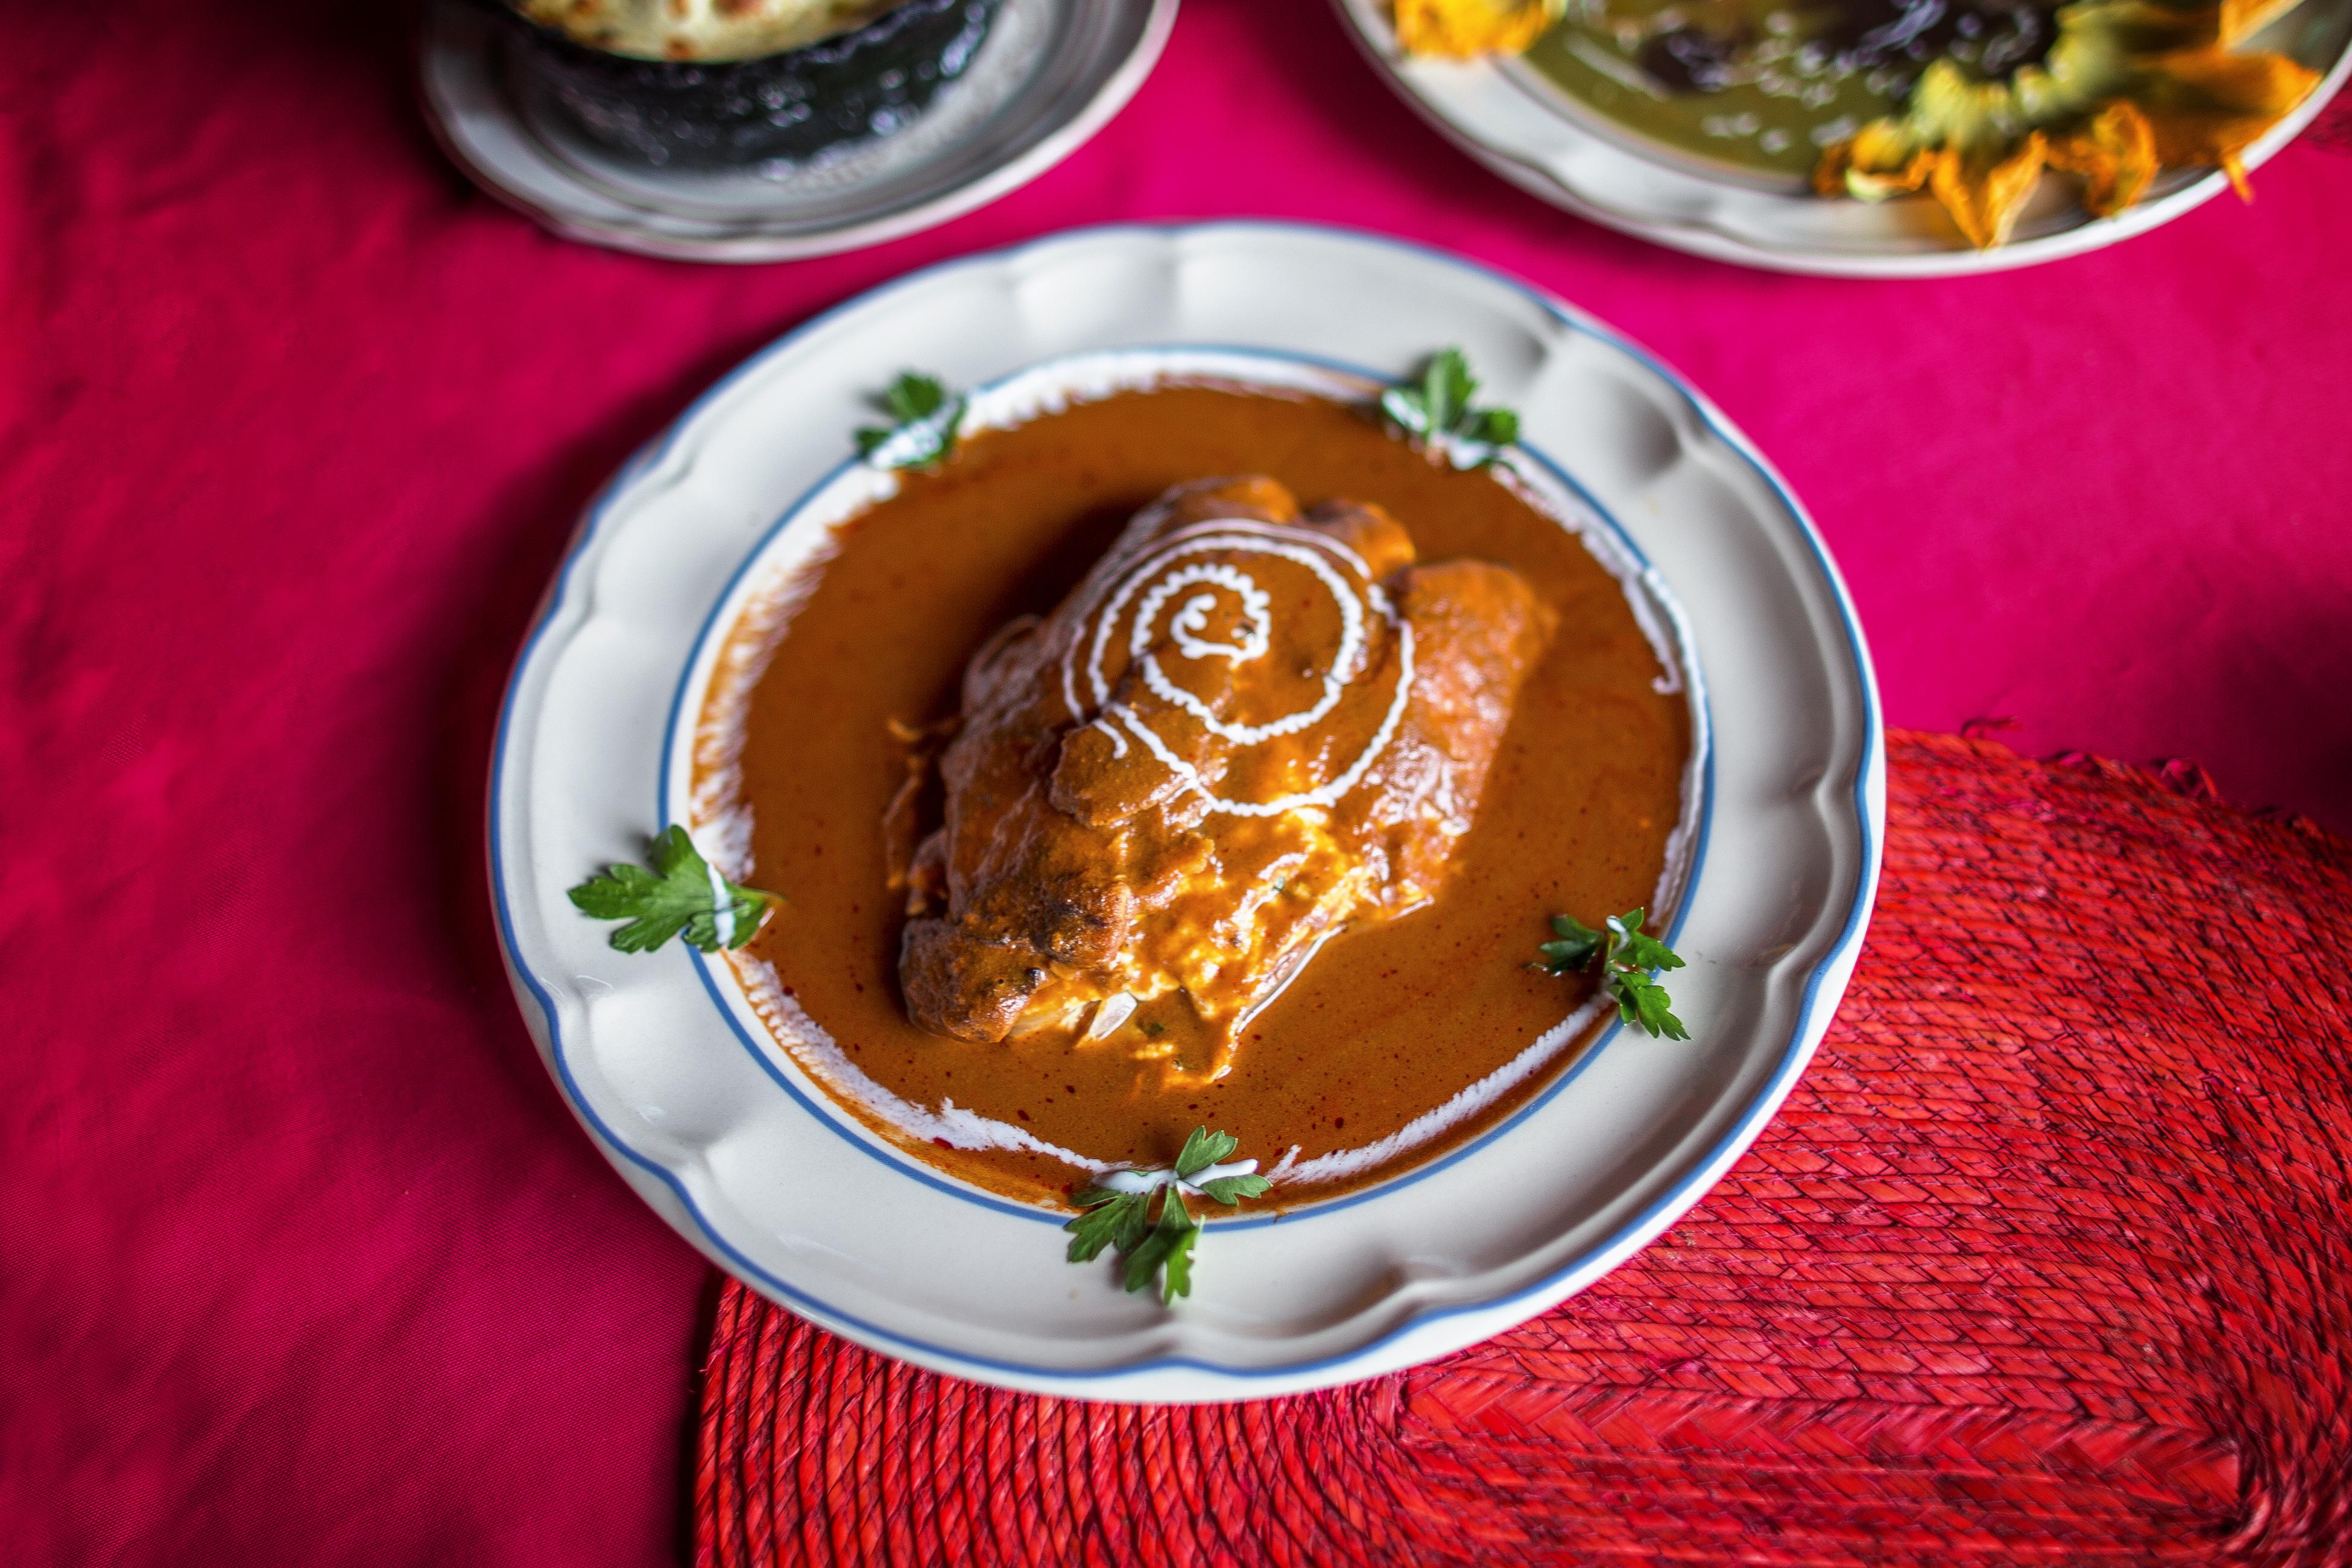 Mole coloradito is a classic sauce served with chicken in southern Mexico